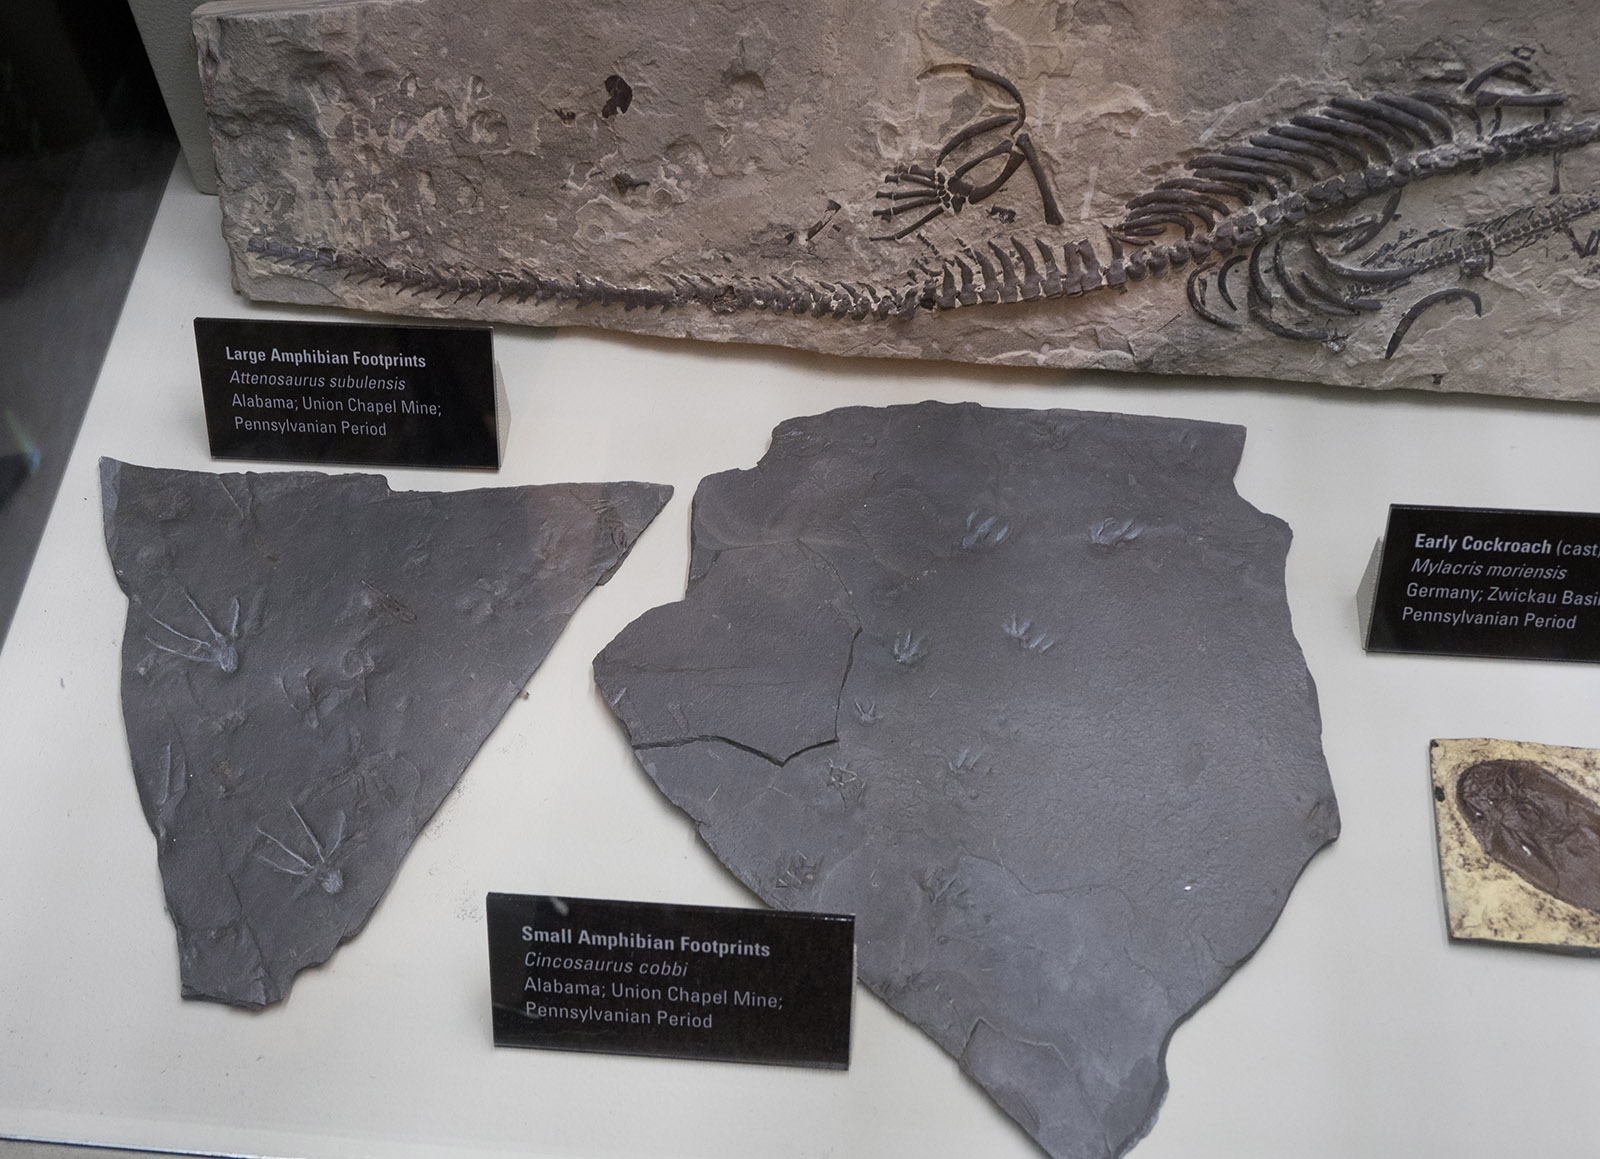 Trace fossils of amphibian footprints from the Pennsylvanian Period (323 Ma) in slate recovered from the Union Chapel Coal Mine.  Anniston Museum of Natural History